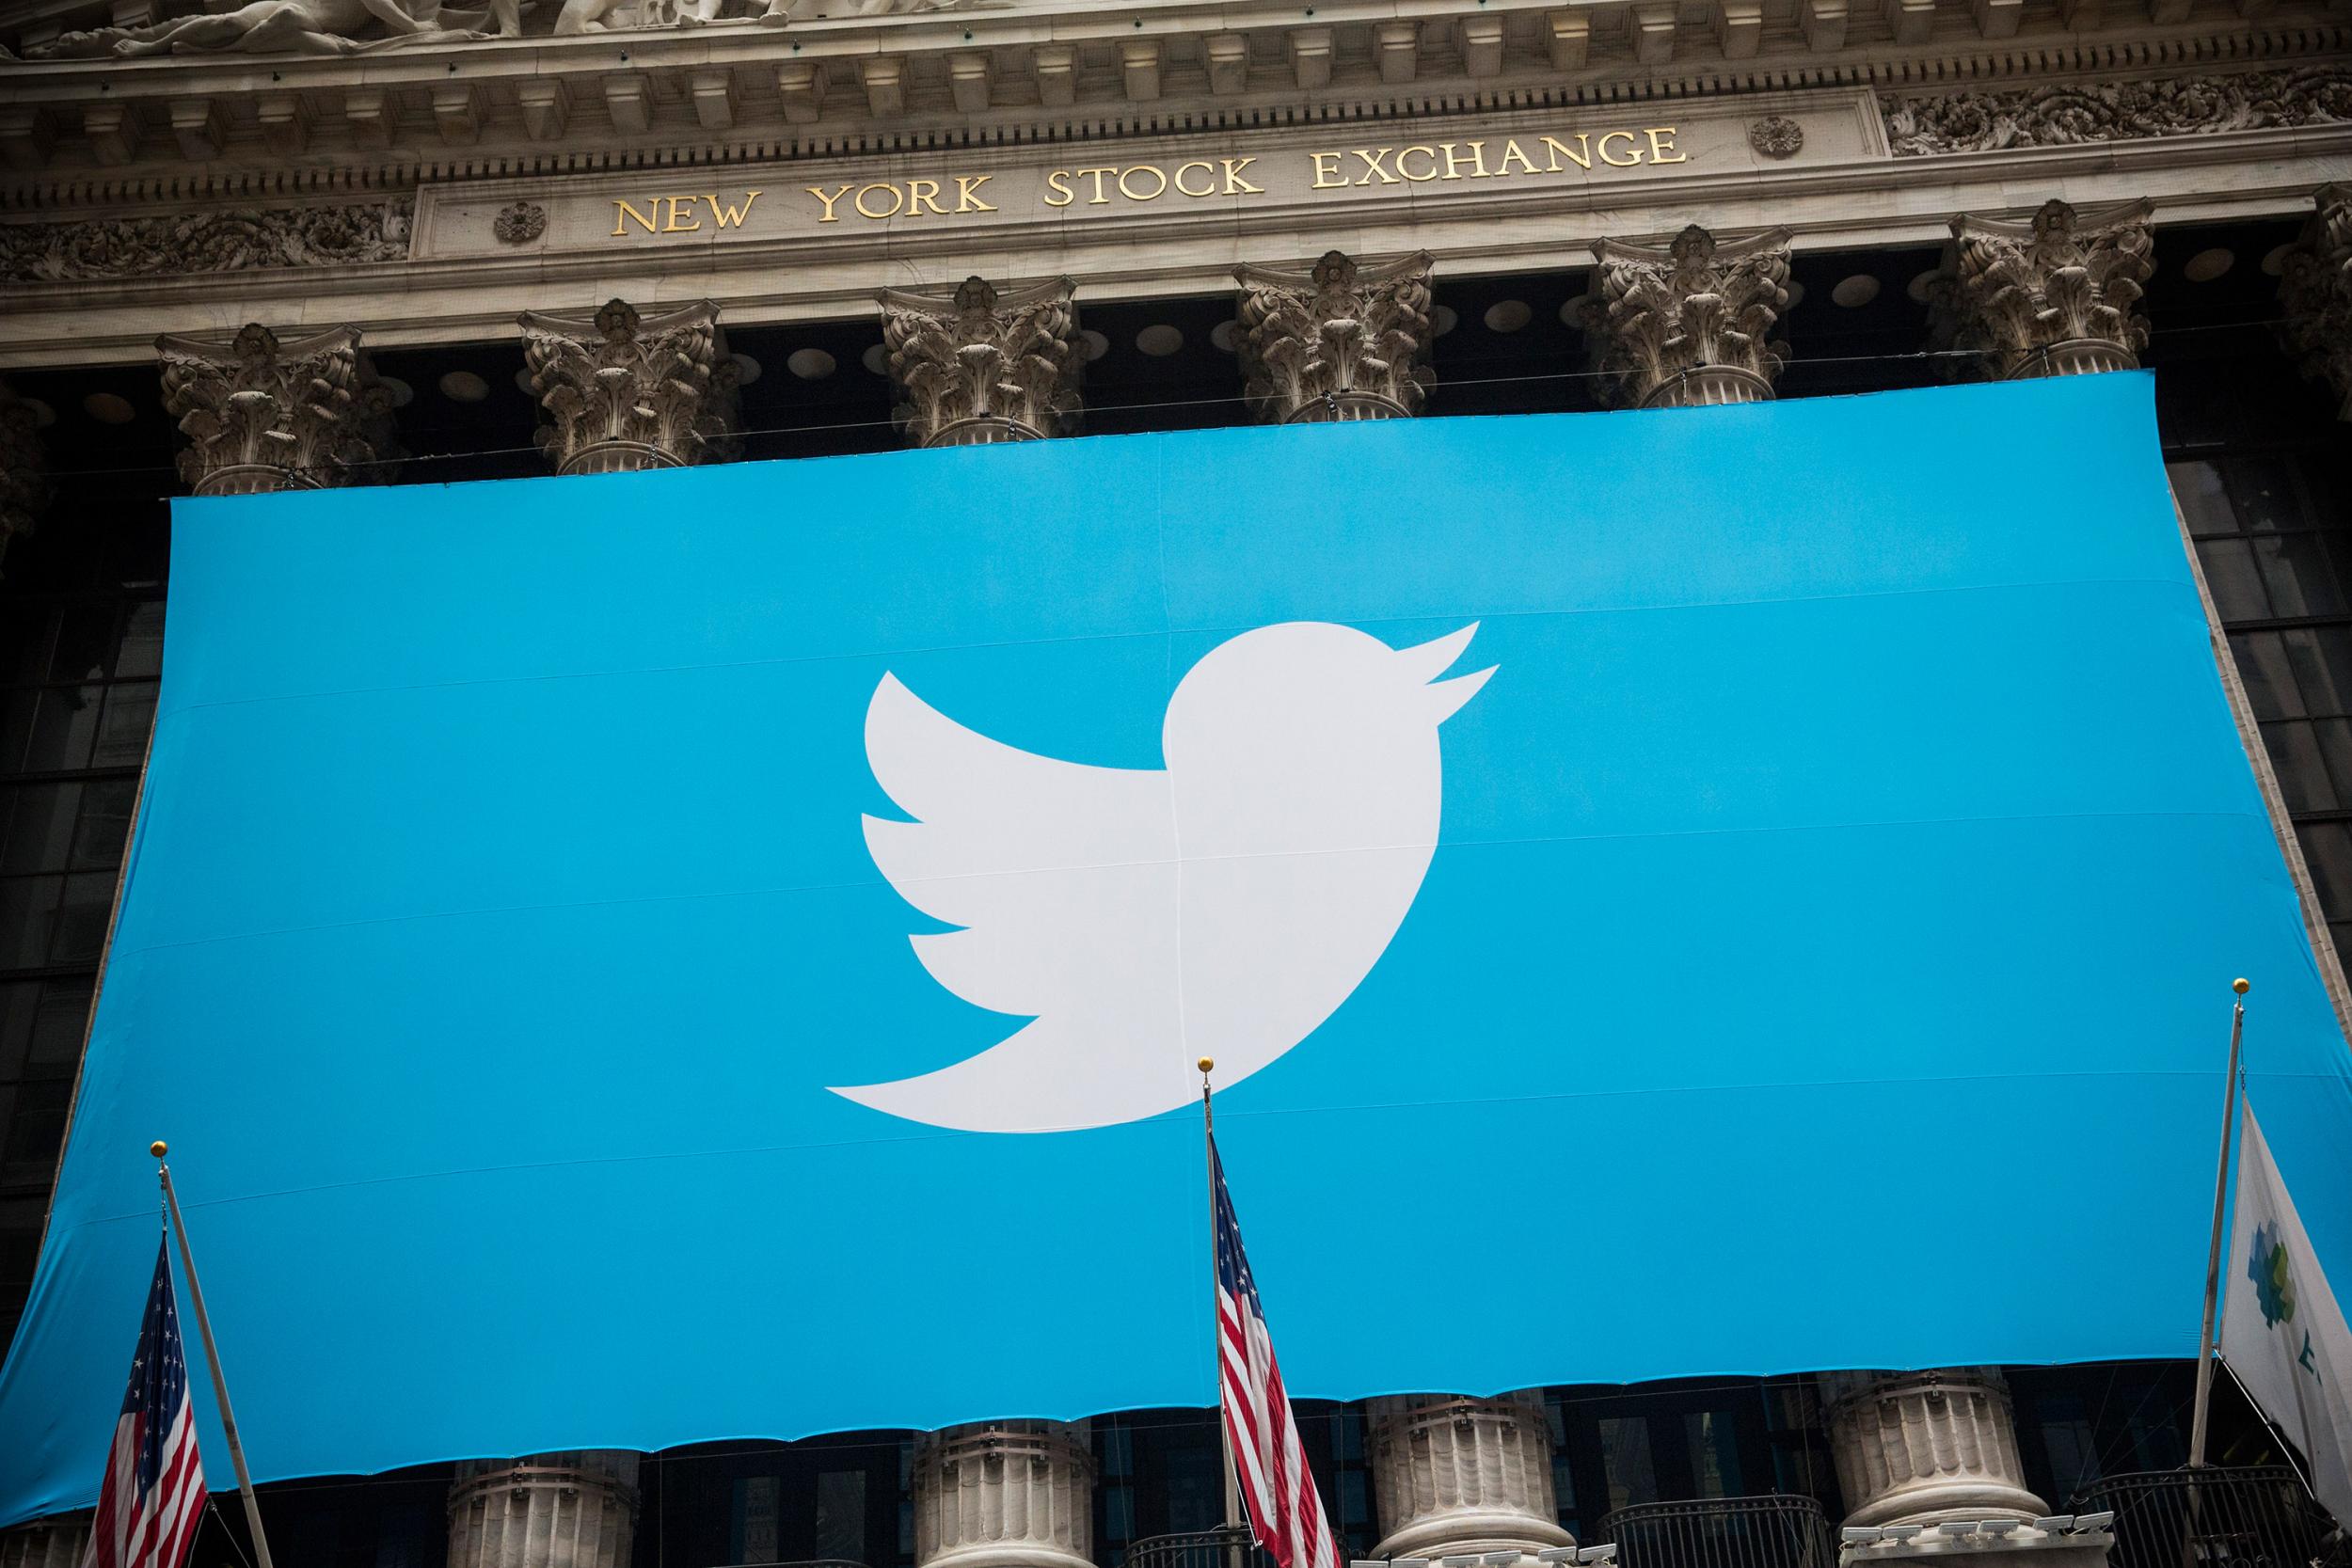 The Twitter logo on a banner outside the New York Stock Exchange